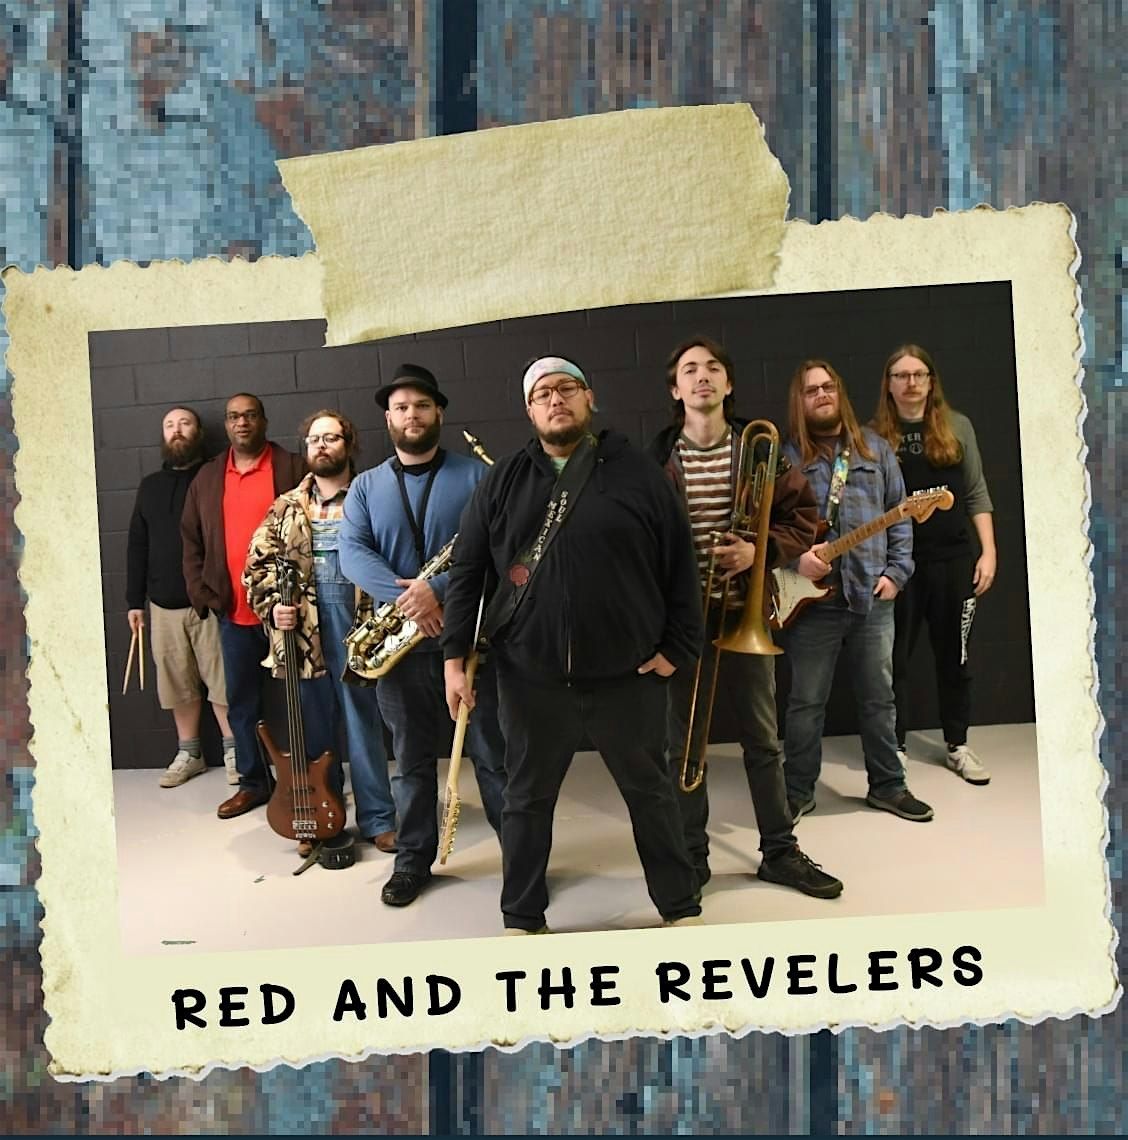 Elysian Gardens Presents Red and the Revelers